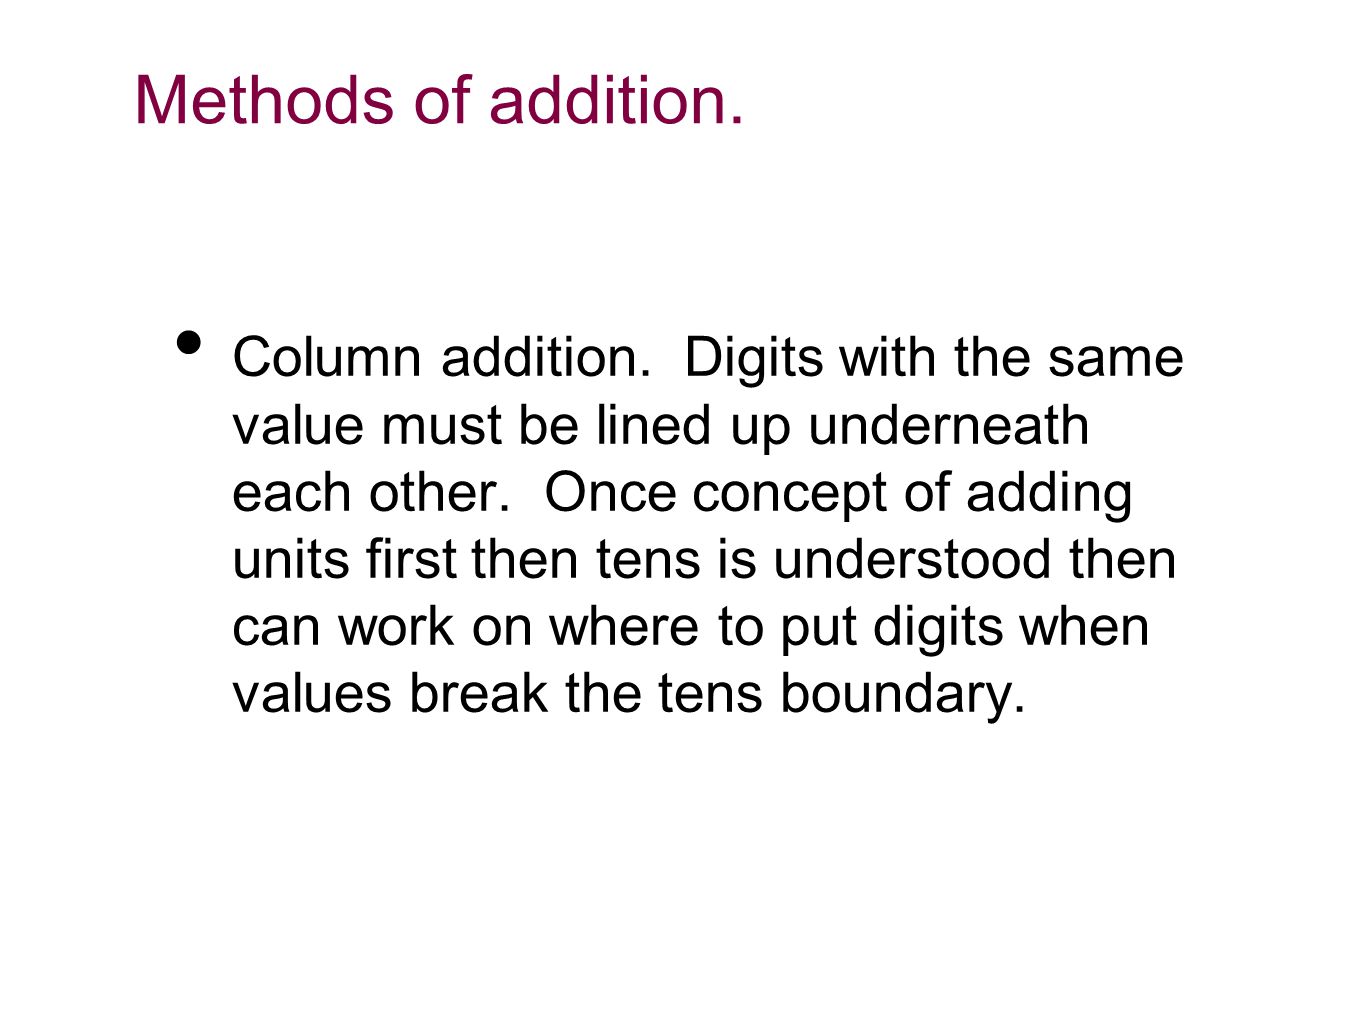 Column addition. Digits with the same value must be lined up underneath each other.